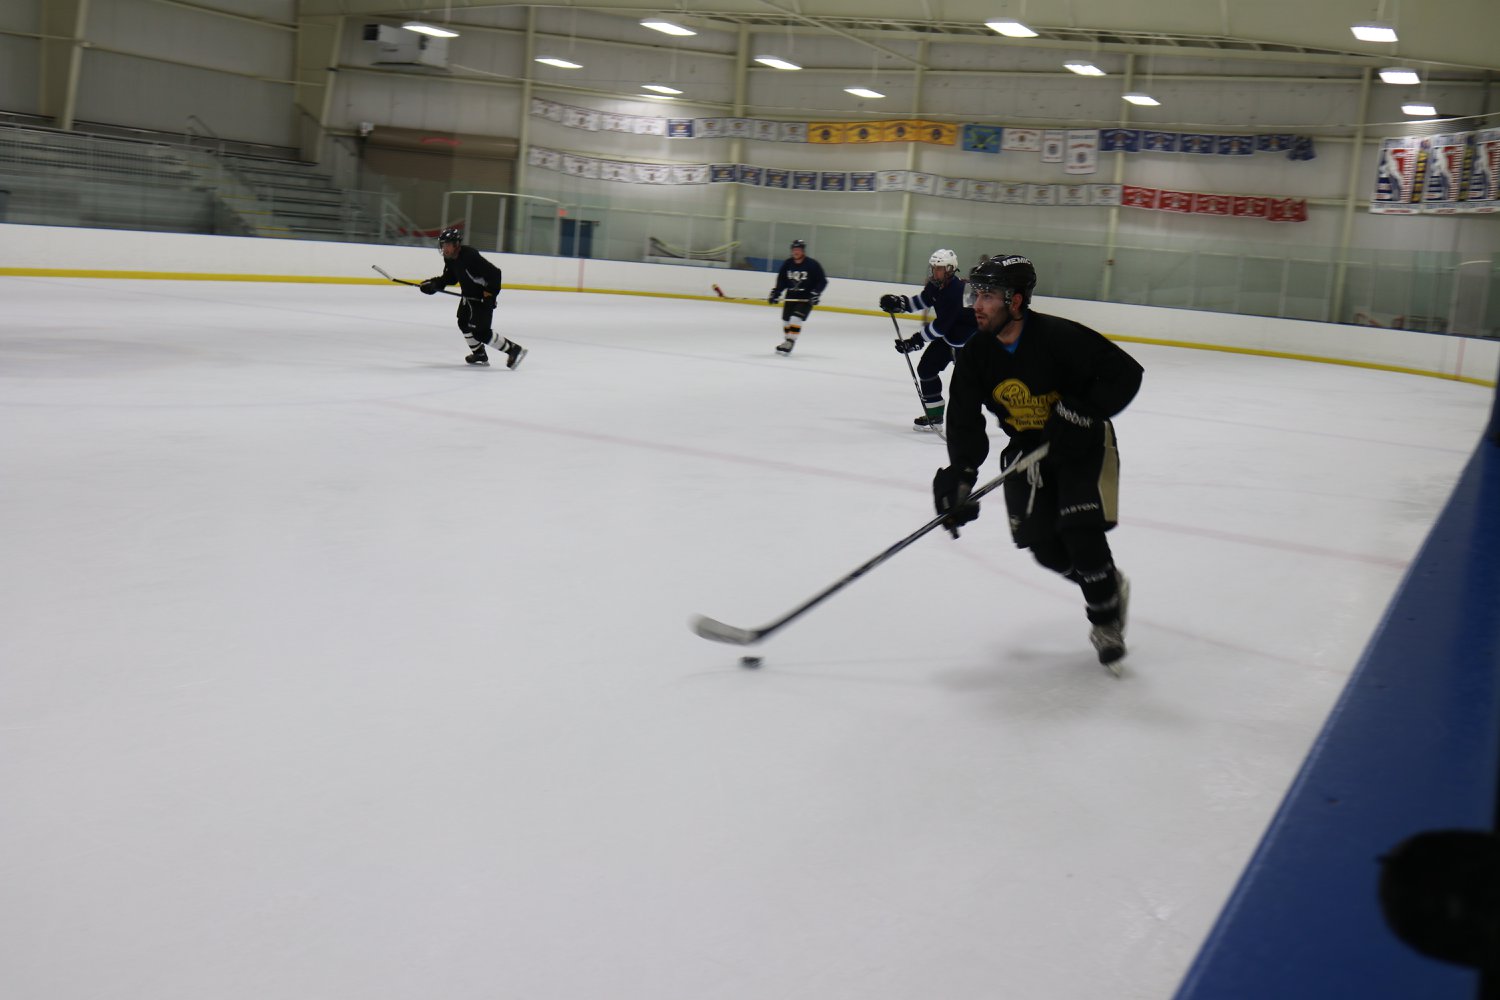 Adult hockey lessons prepare skaters to be great hockey players at Rocket Ice Skating Rink